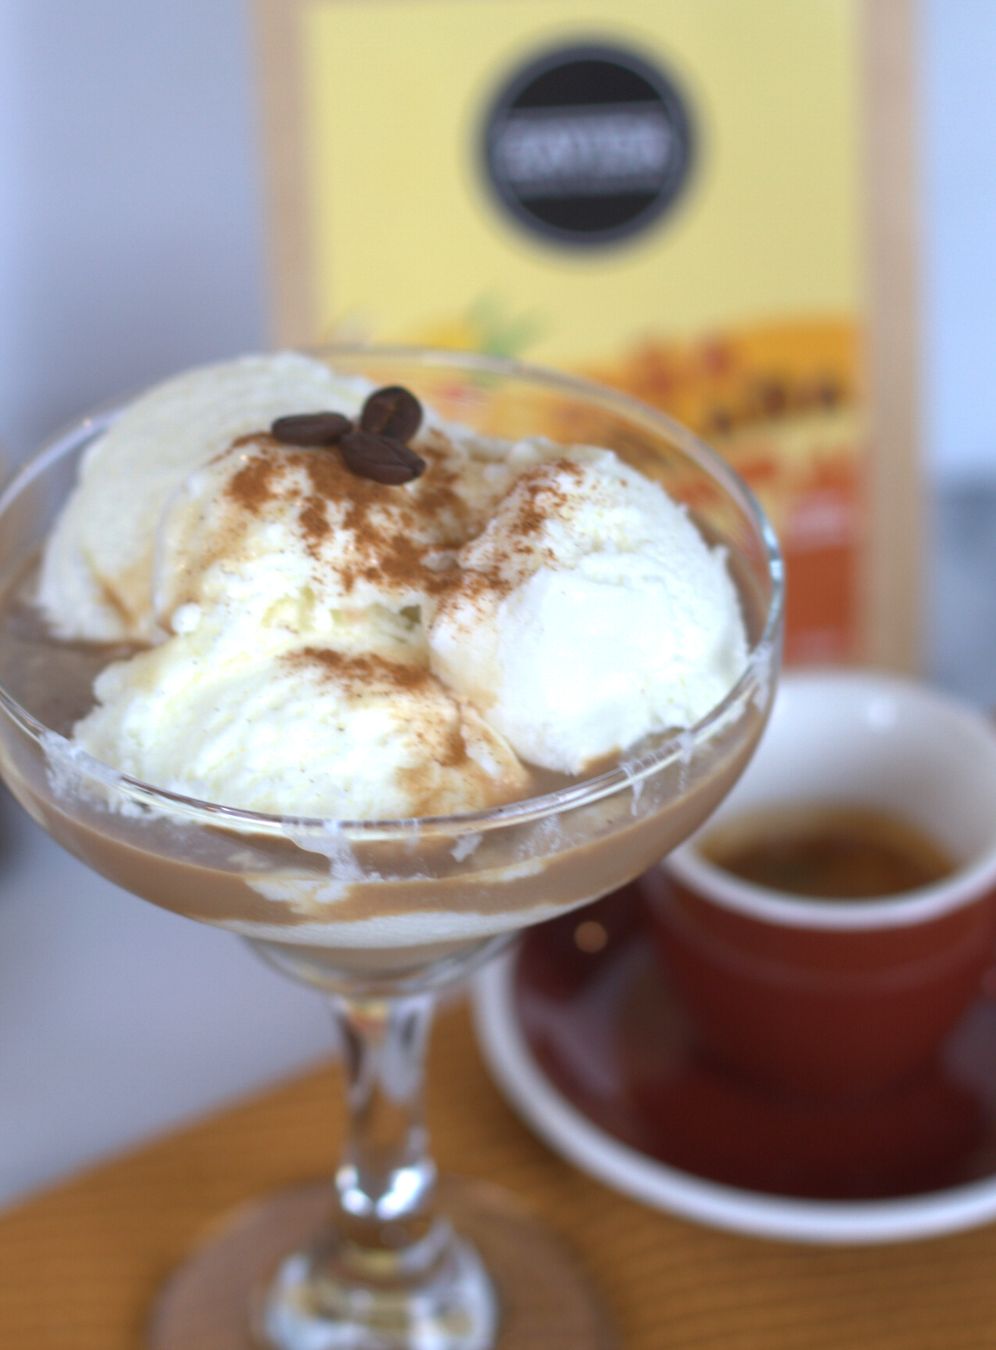 A unique twist on a Mexican coffee, use ice cream and Piña Colada flavored coffee